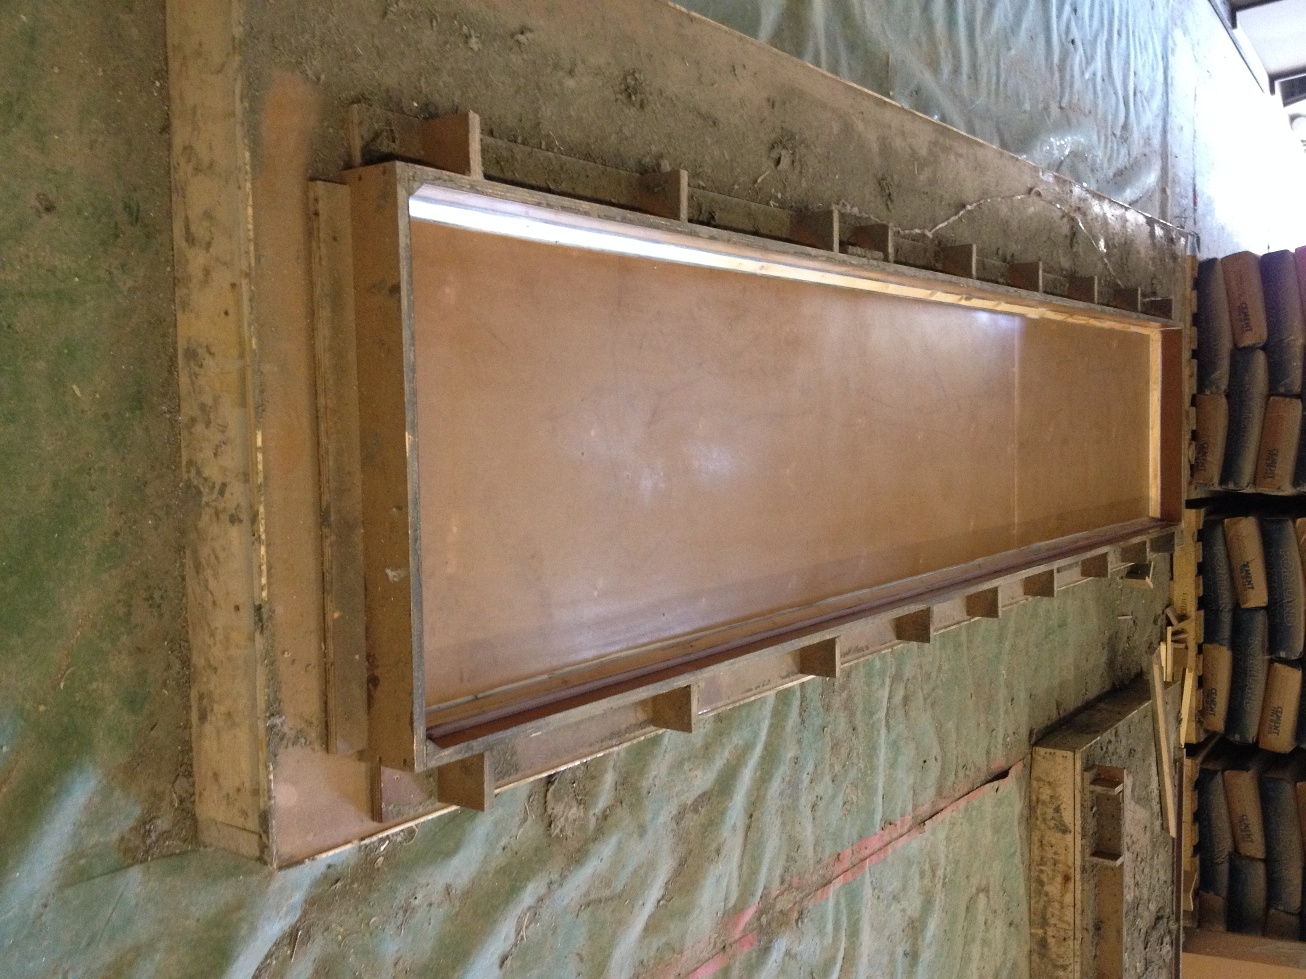 Architectural GFRC: Typical mold with release coating for smooth surface